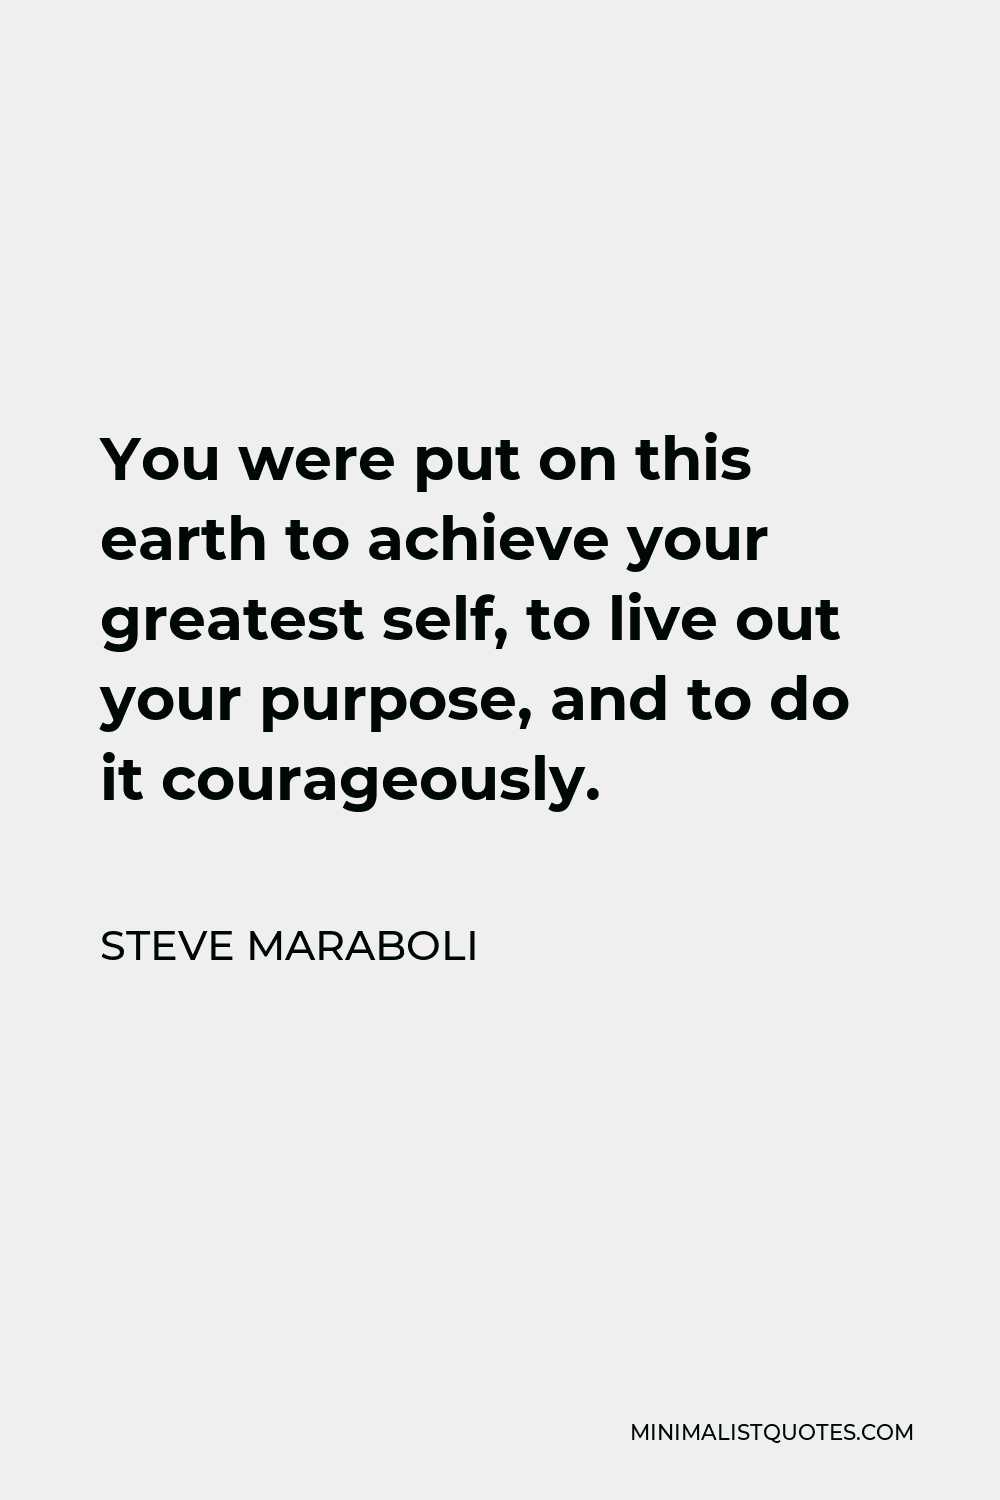 Steve Maraboli Quote - You were put on this earth to achieve your greatest self, to live out your purpose, and to do it courageously.